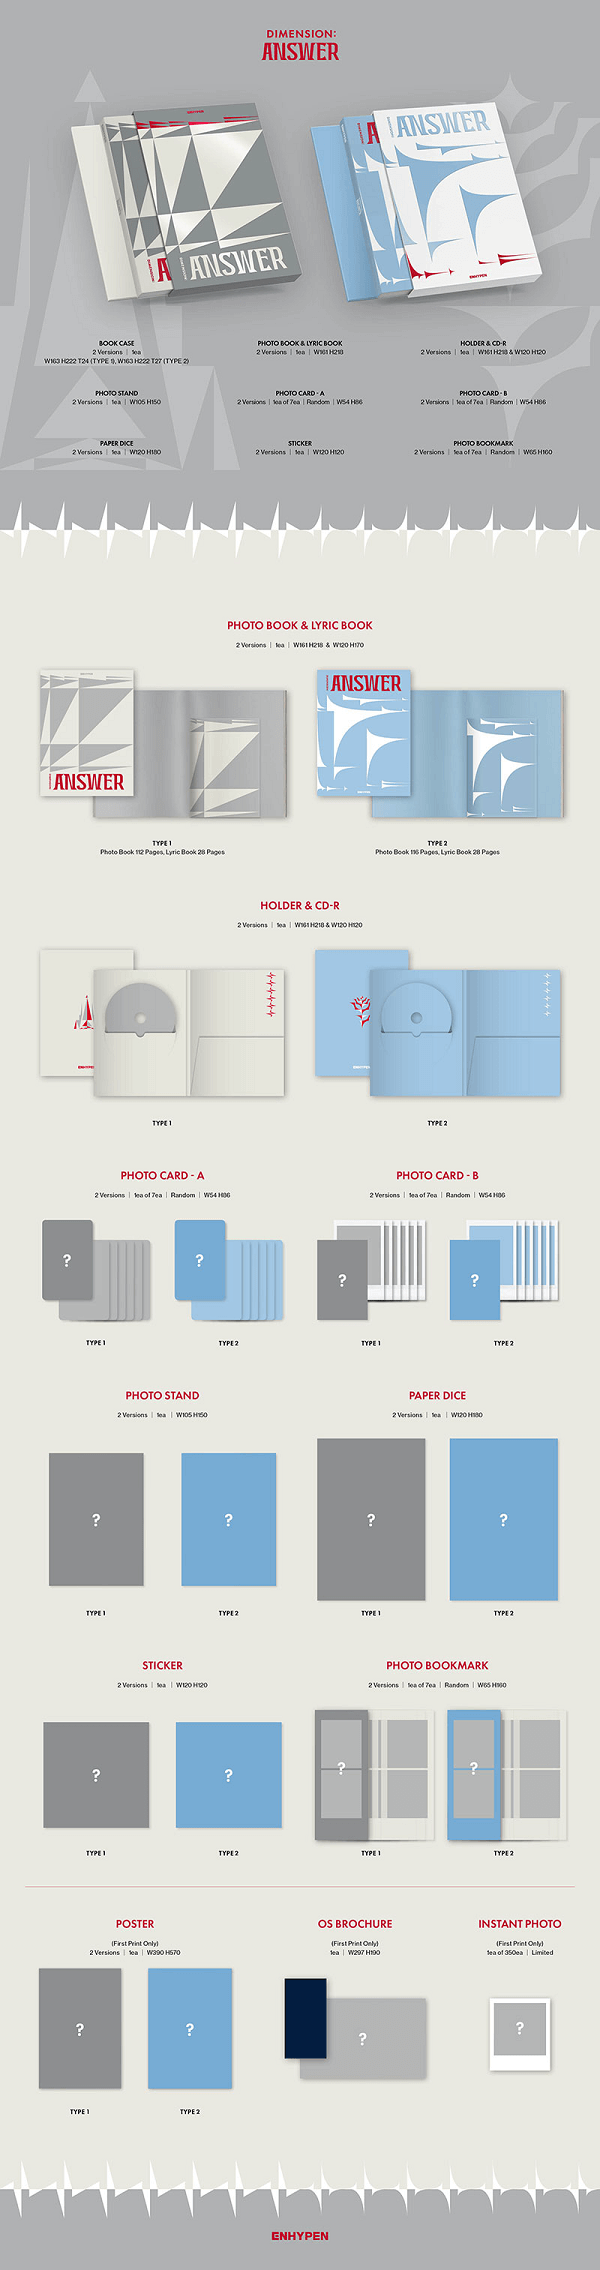 PREORDER  ENHYPEN - THE 1ST FULL REPACKAGE ALBUM DIMENSION  ANSWER Infographic